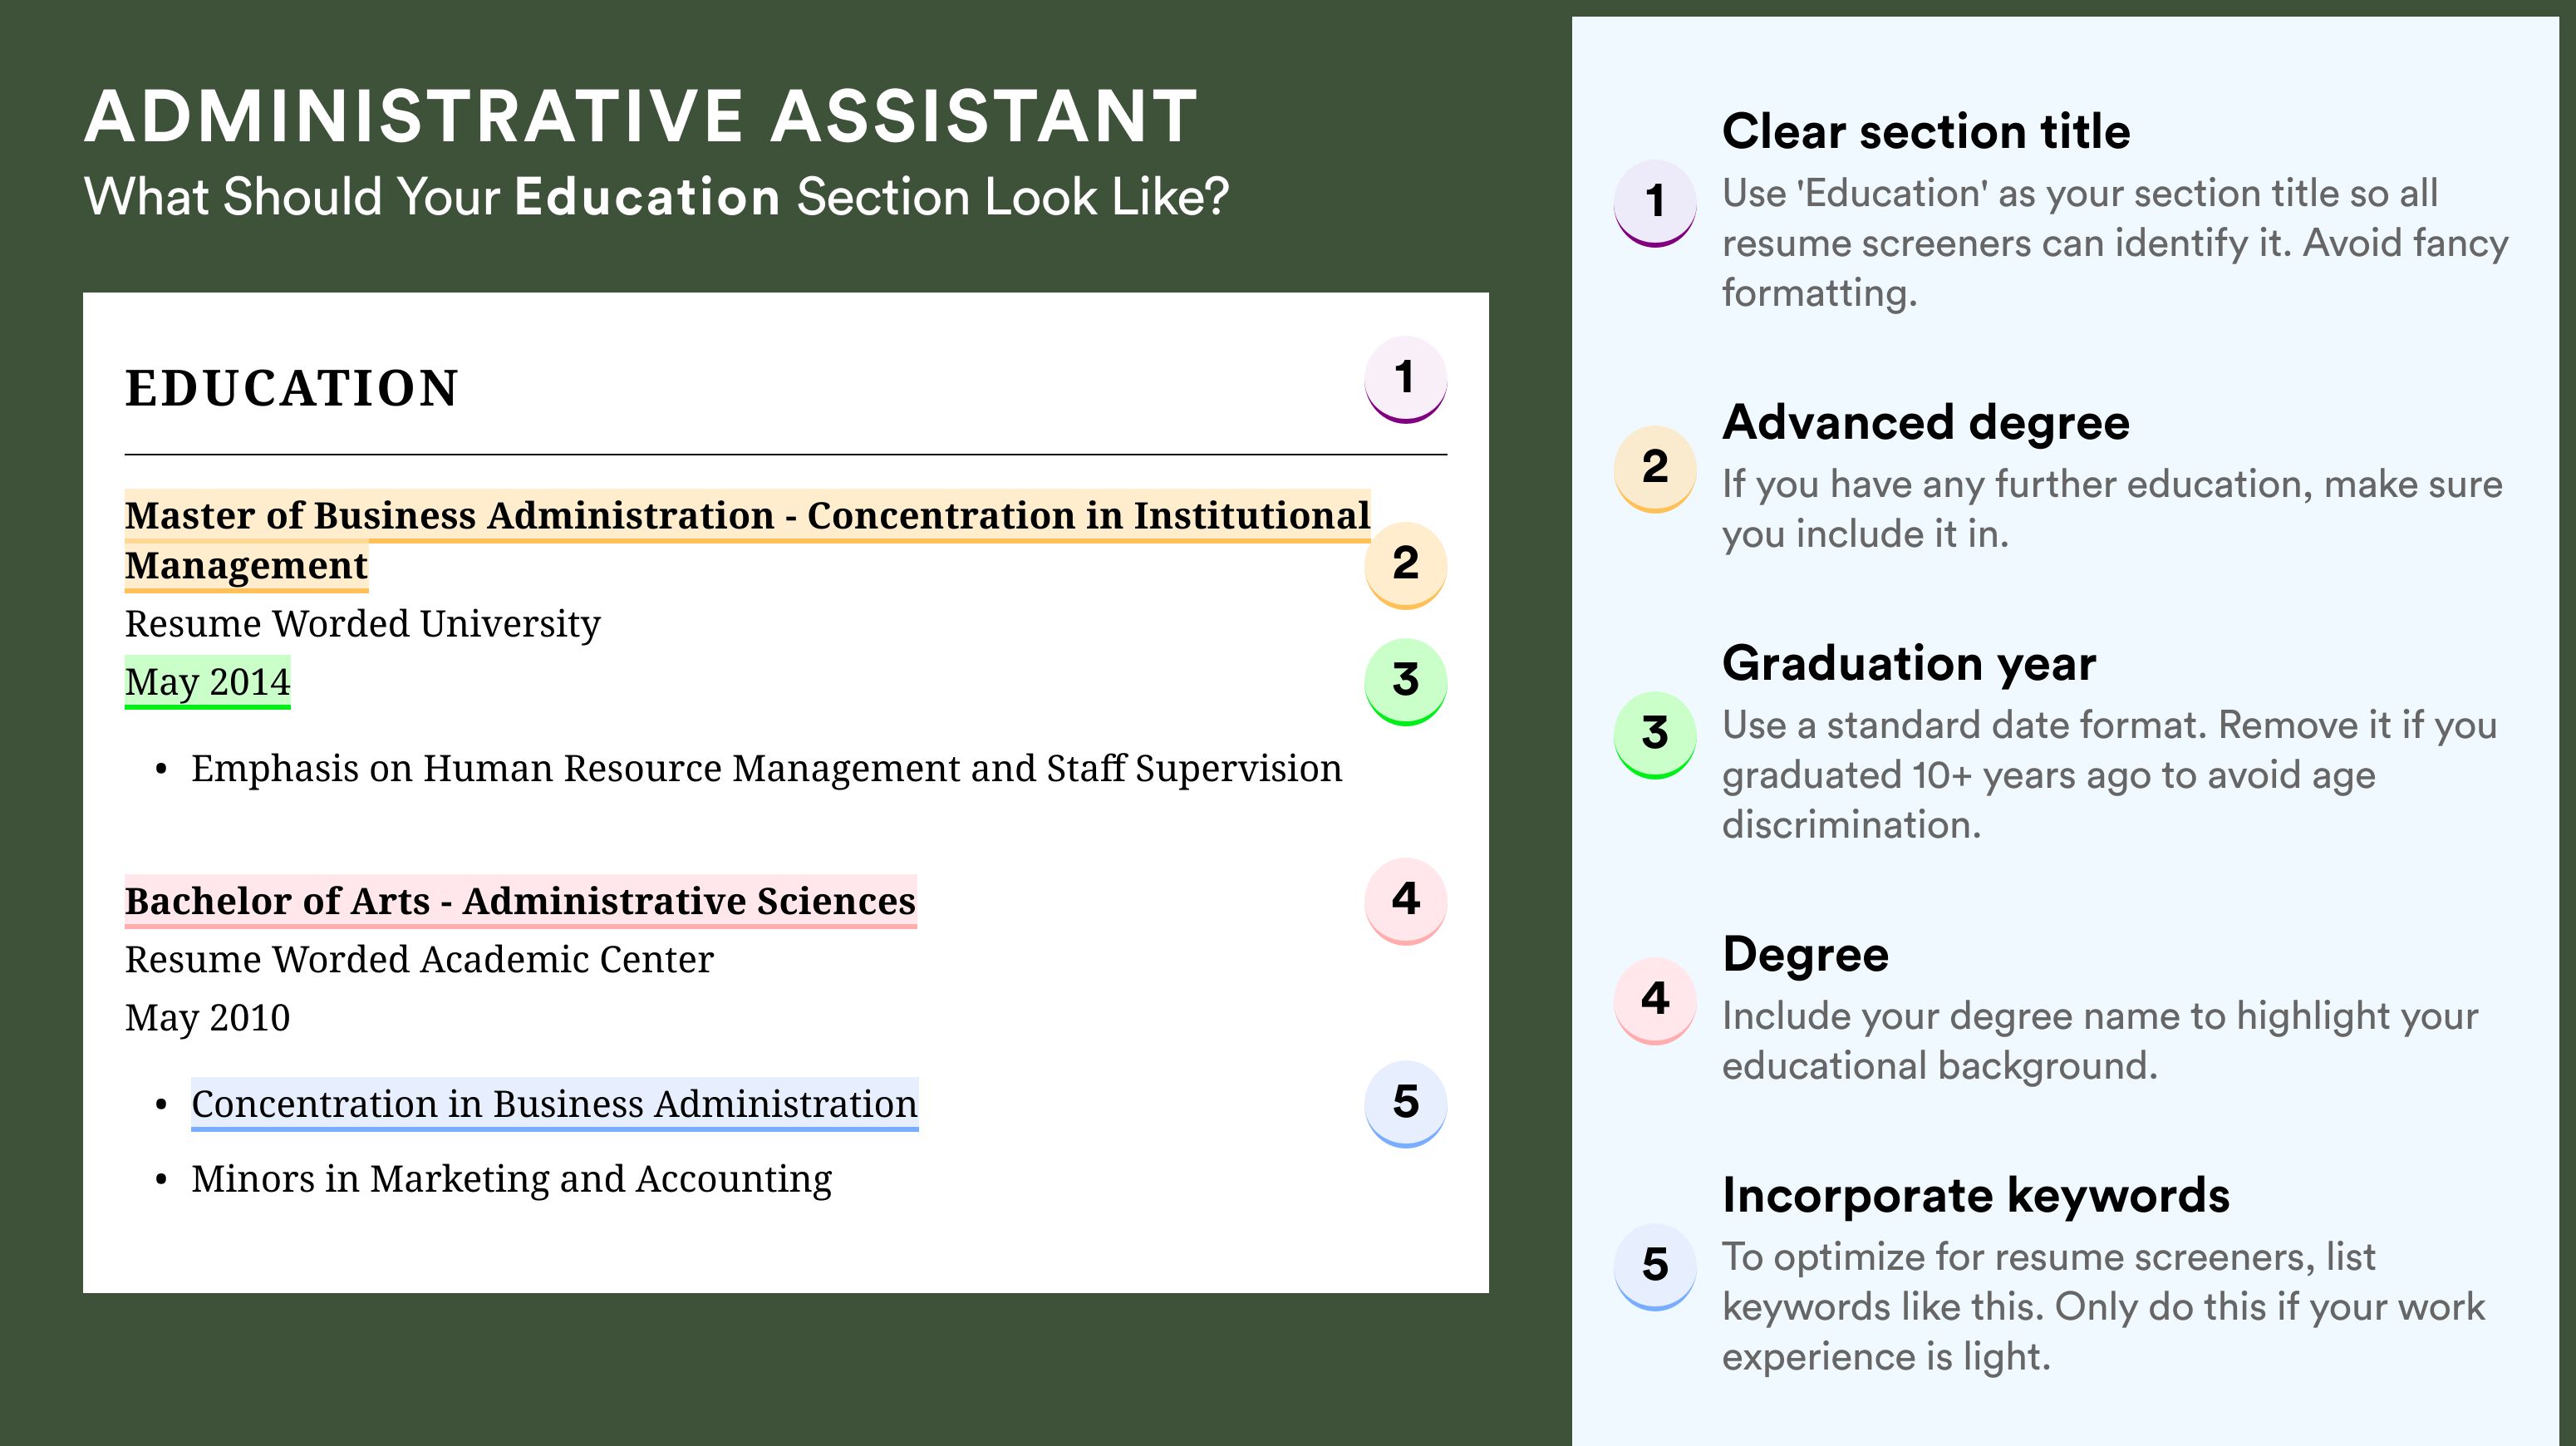 How To Write An Education Section - Administrative Assistant Roles